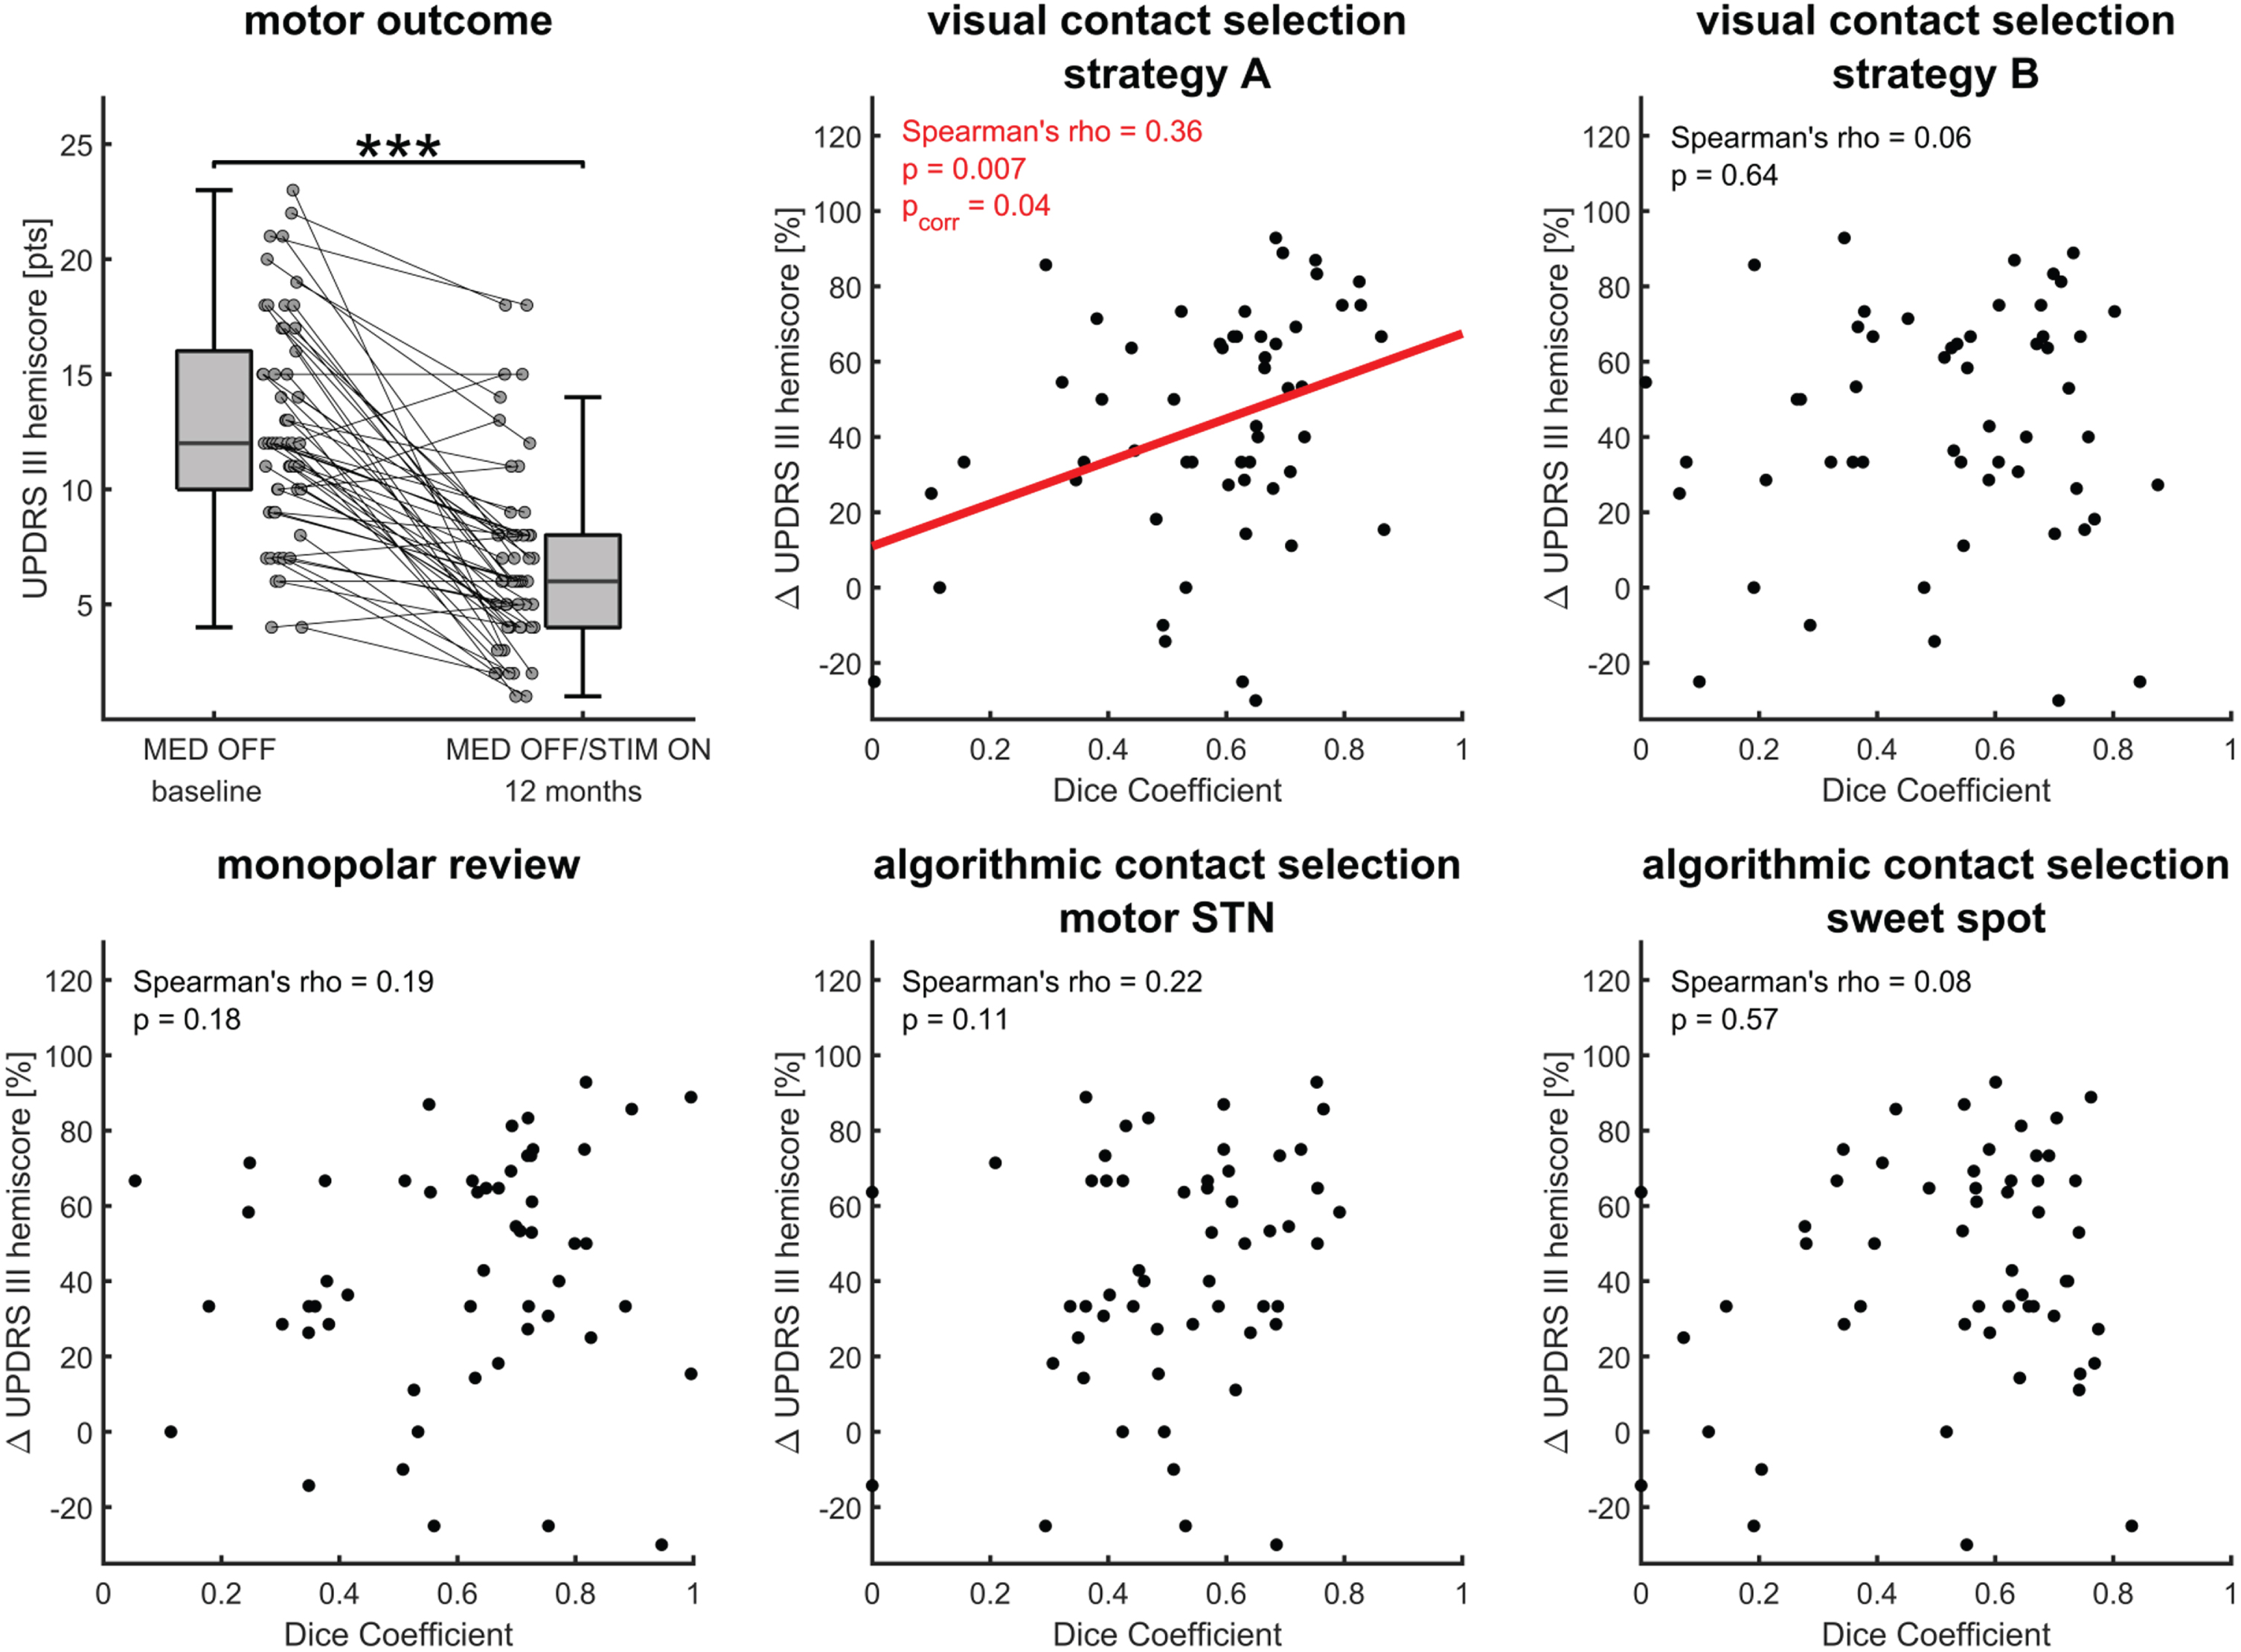 Lateralized motor outcomes in correlation to contact selection strategies. A) Compared to preoperative baseline (MED OFF), UPDRS III hemiscore significantly improved in MED OFF/STIM ON 12 months after surgery. ***p< 0.001 (paired t-test). B-F) Lateralized motor outcomes were significantly correlated to the dice coefficients (DC) between chronic stimulation and visual contact selection focussed on the dorsal motor STN (VISUAL-A). DCs of the contact selection based on the monopolar review (MPR), an alternative visual contact selection strategy involving the dorsal adjacent white matter (VISUAL-B), algorithmically optimized coverage of the motor STN (ALGO-mSTN), or the sweet spot (ALGO-sweetspot) were not correlated to changes in UPDRS III hemiscore [15]. In the case of statistical significance, a least-squares regression line (red) was added as a visual reference.